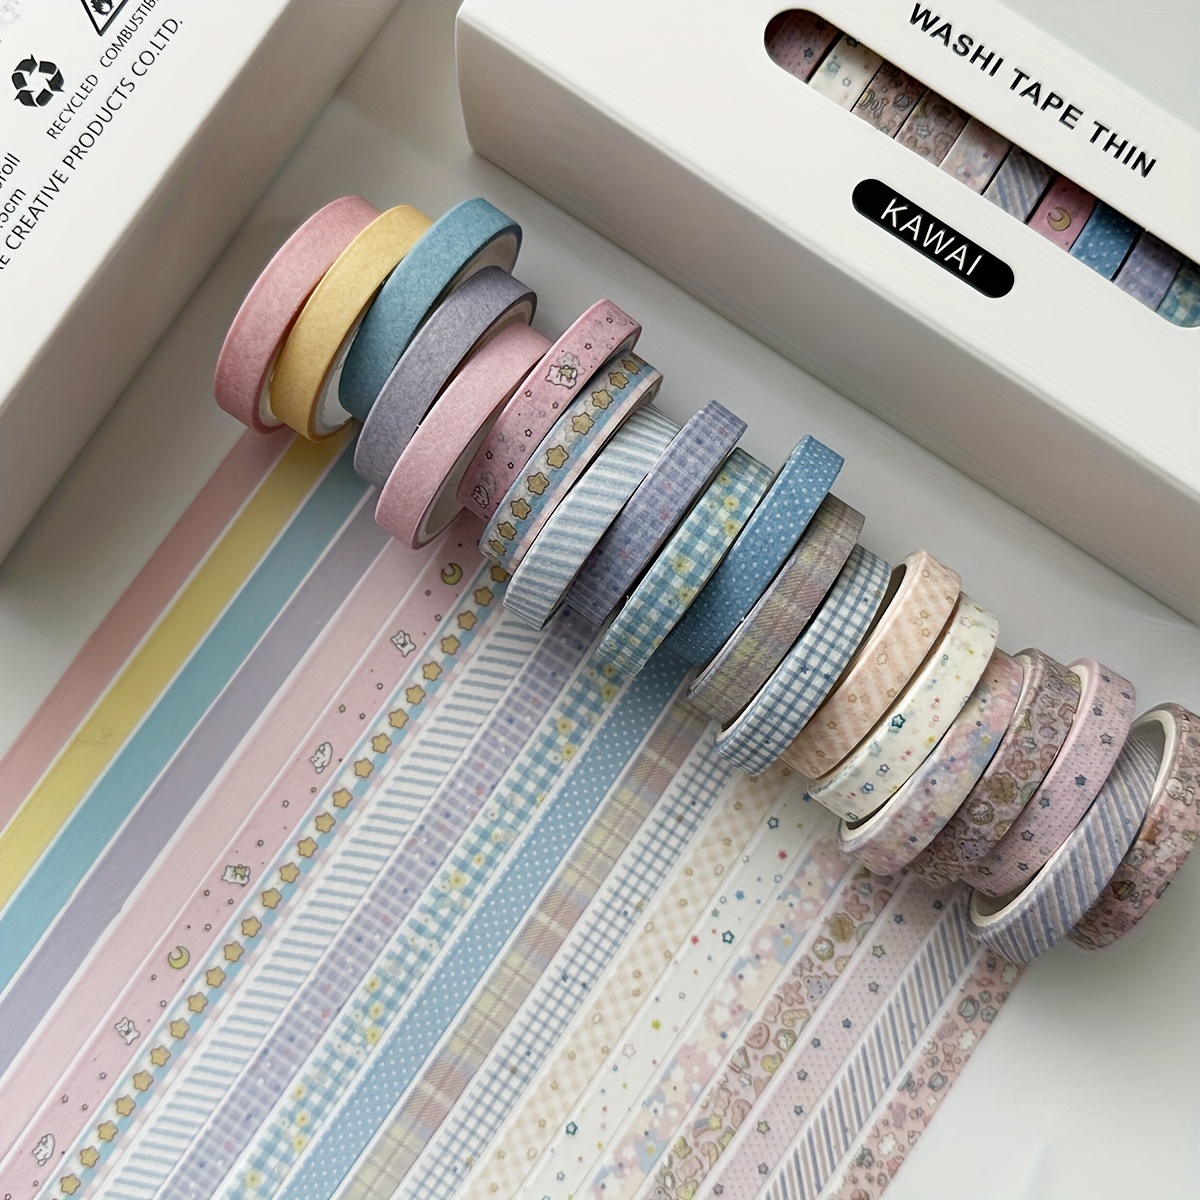  24 Rolls Washi Masking Tape Set,Decorative Craft Tape  Collection for DIY and Gift Wrapping : Arts, Crafts & Sewing